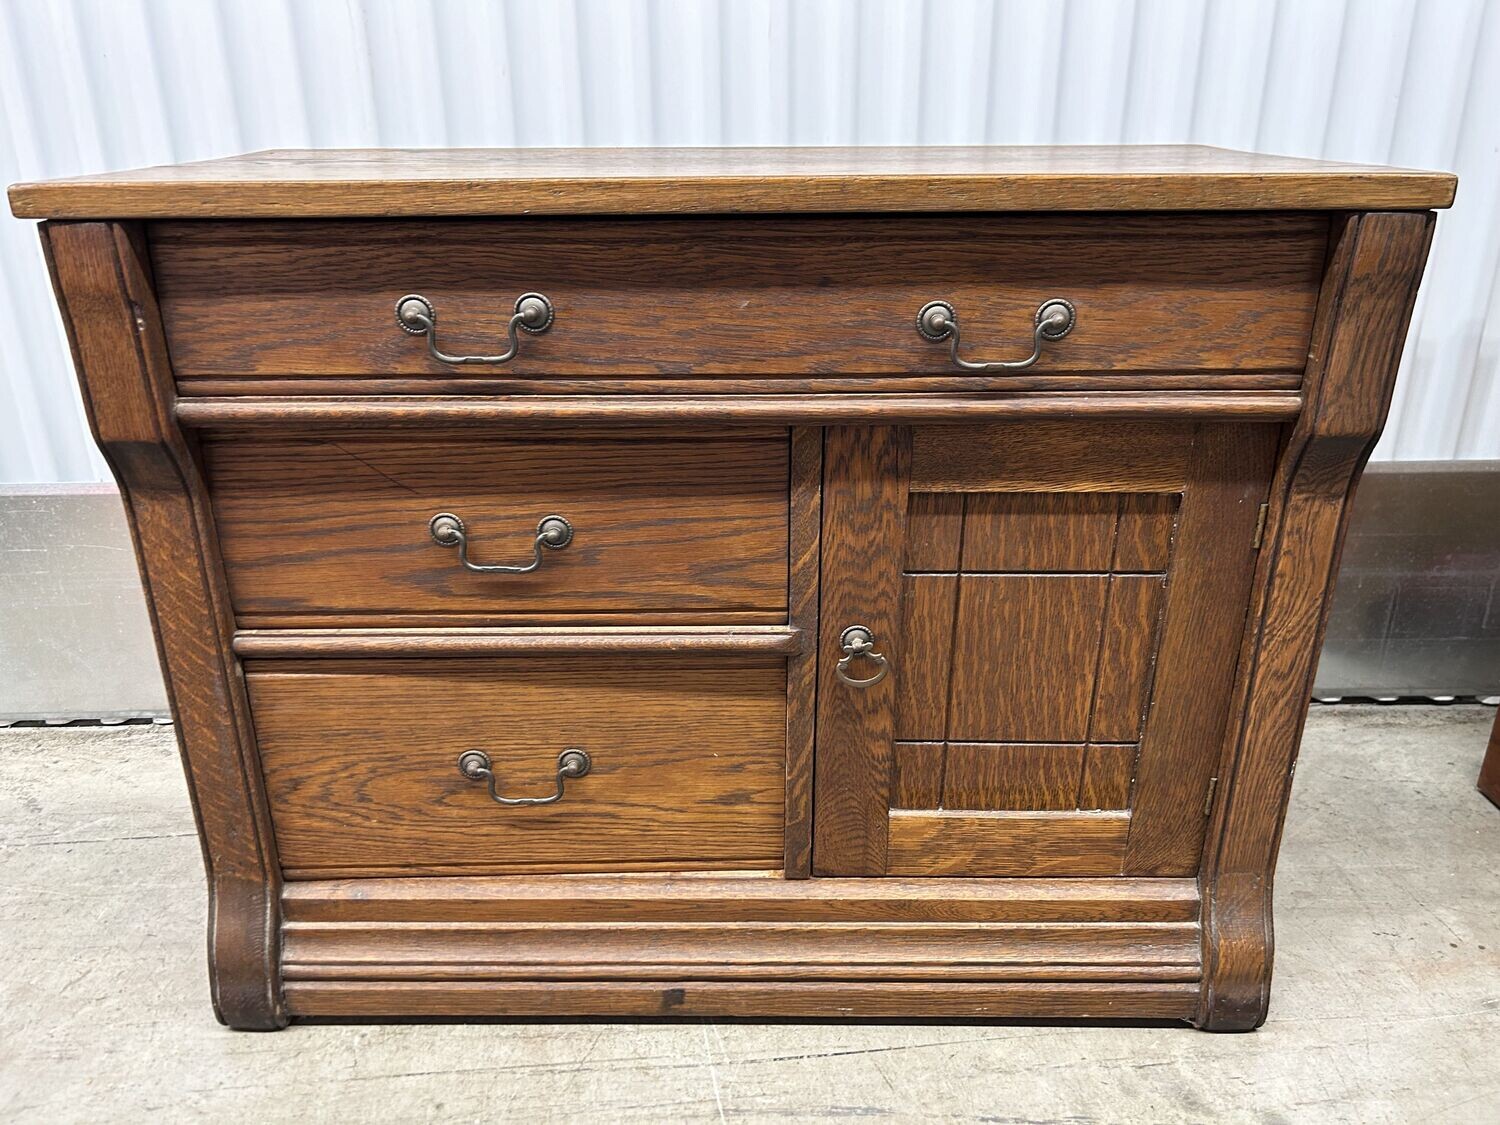 Antique Oak Washstand / storage cabinet #2118 ** 3 days to sell, full price